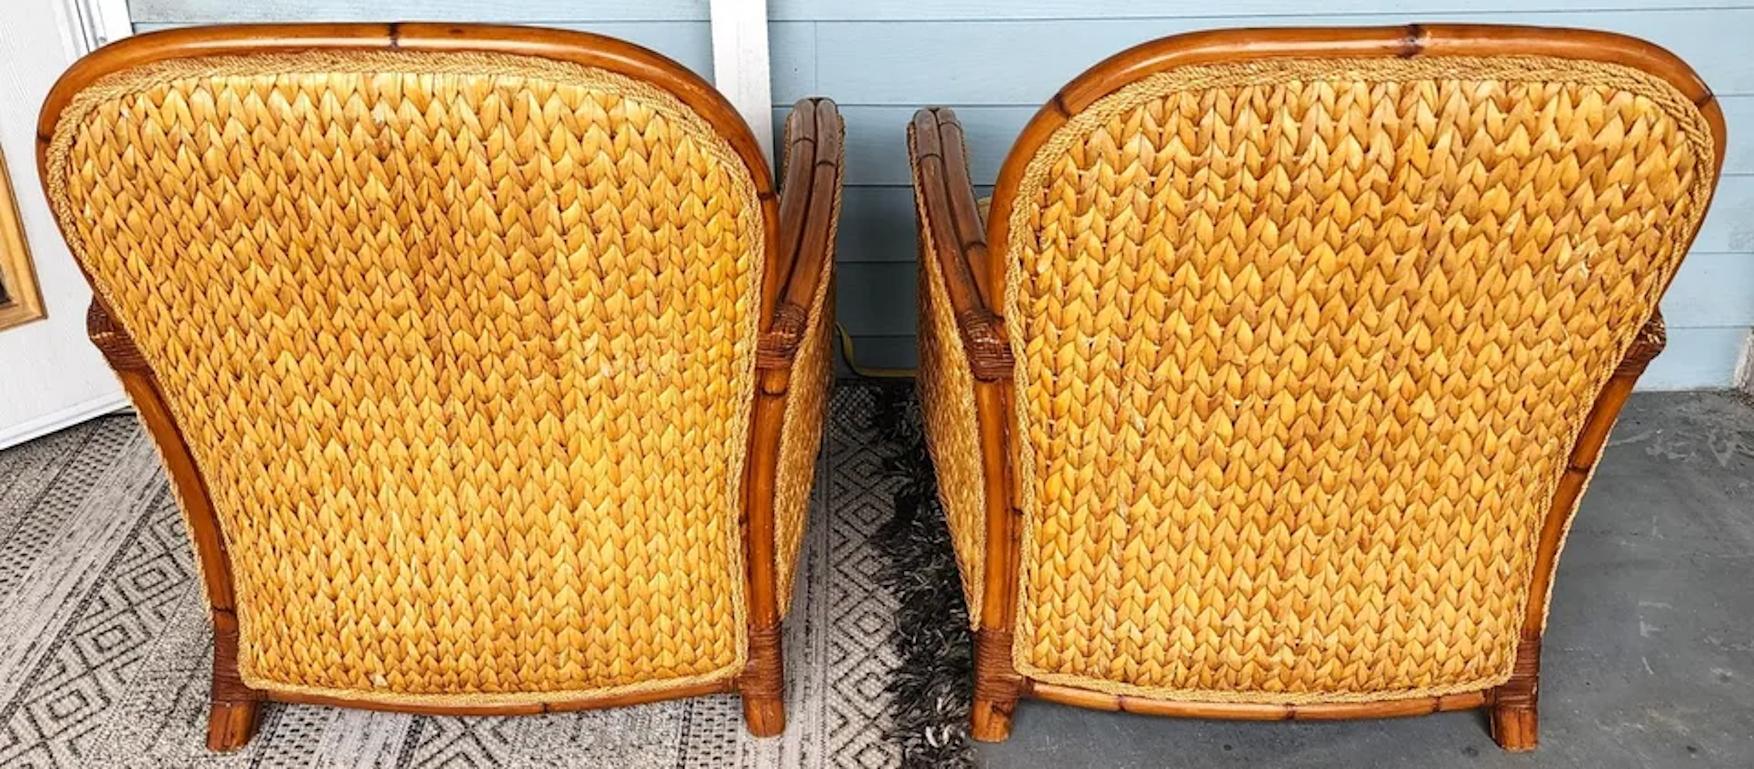 Palacek Lounge Chairs Pair Coastal Beach House In Good Condition For Sale In Lake Worth, FL